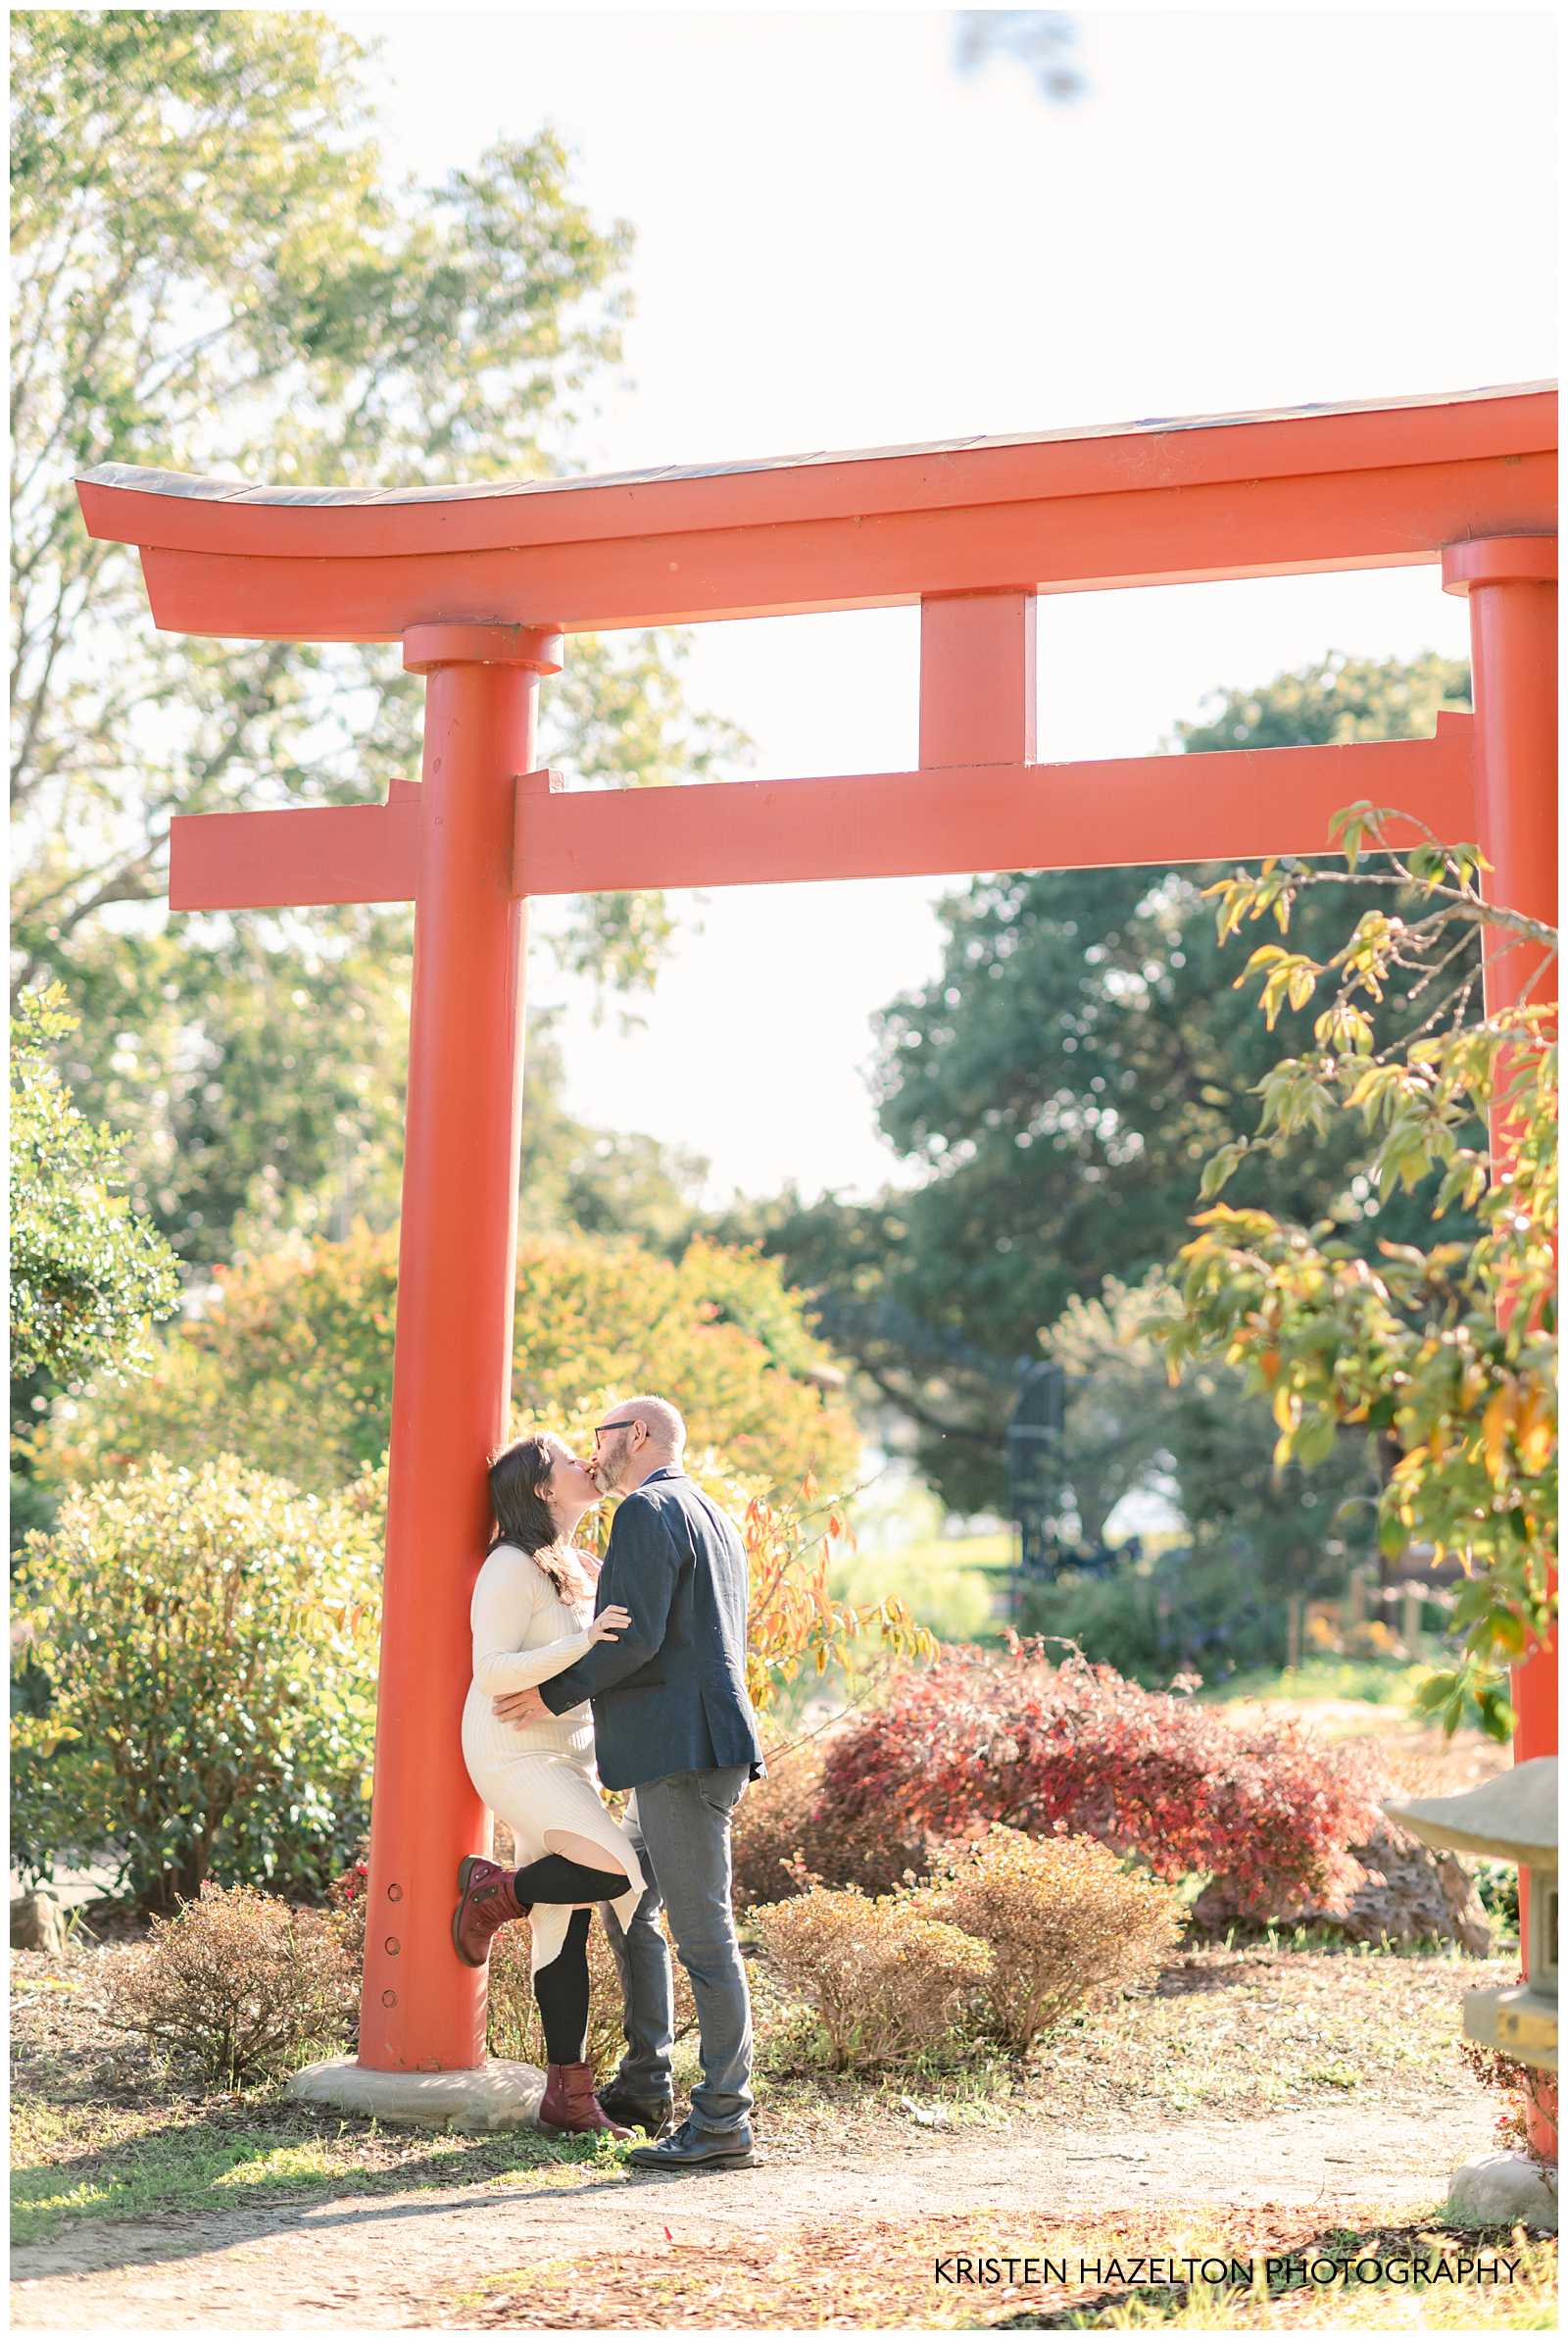 Man and woman kissing at a torii gate  in photos by Bay Area Engagement Photographer Kristen Hazelton